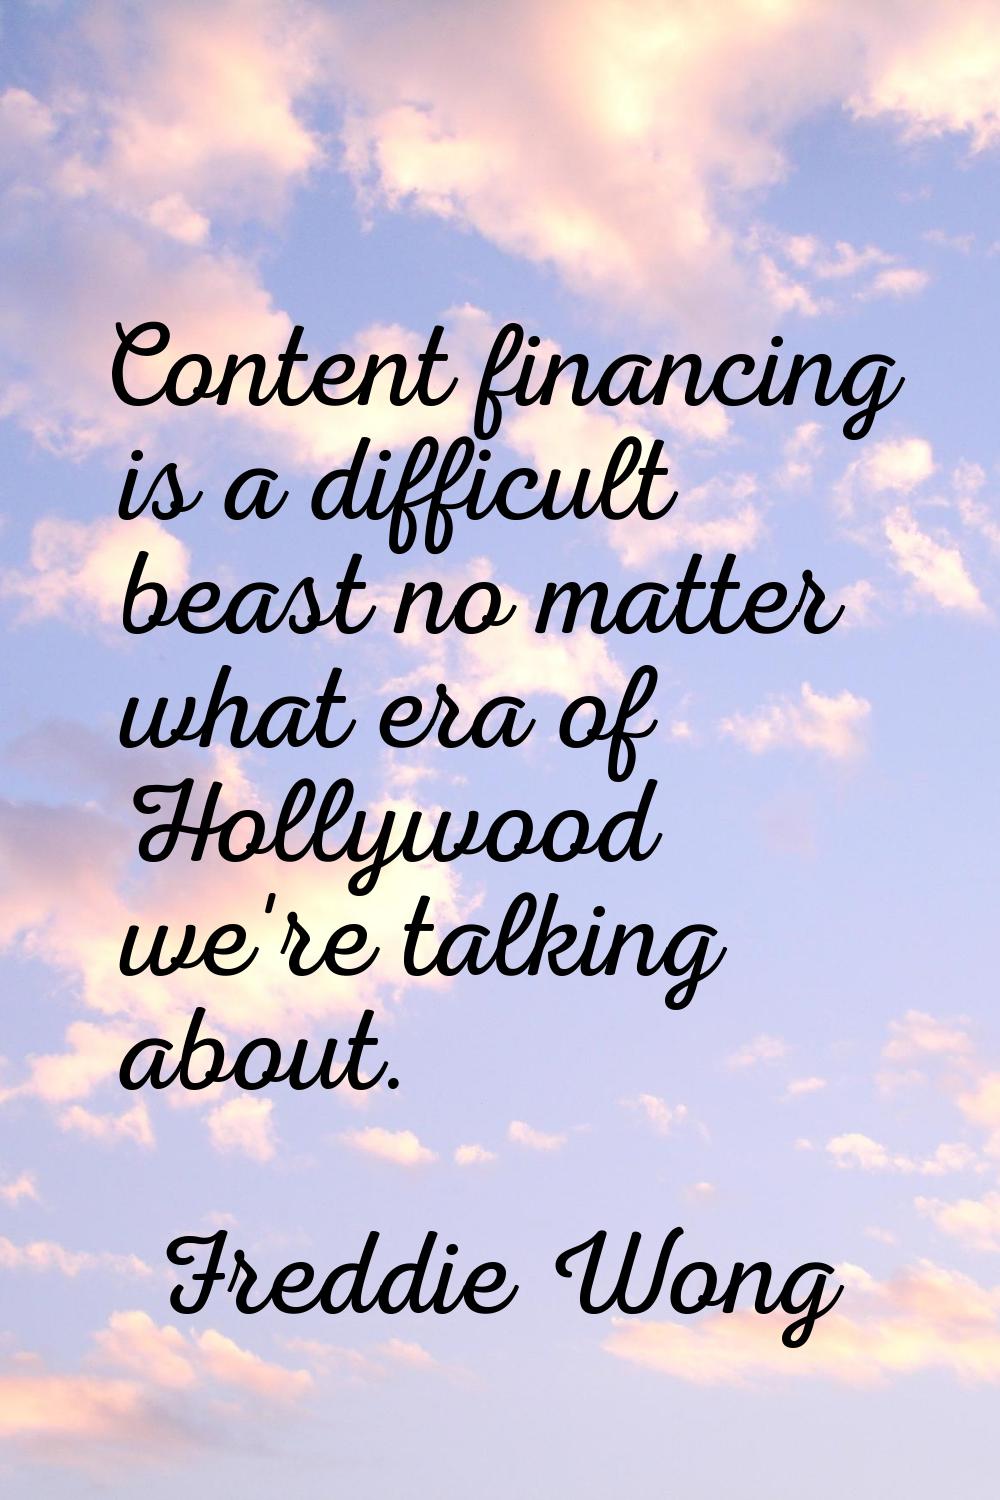 Content financing is a difficult beast no matter what era of Hollywood we're talking about.